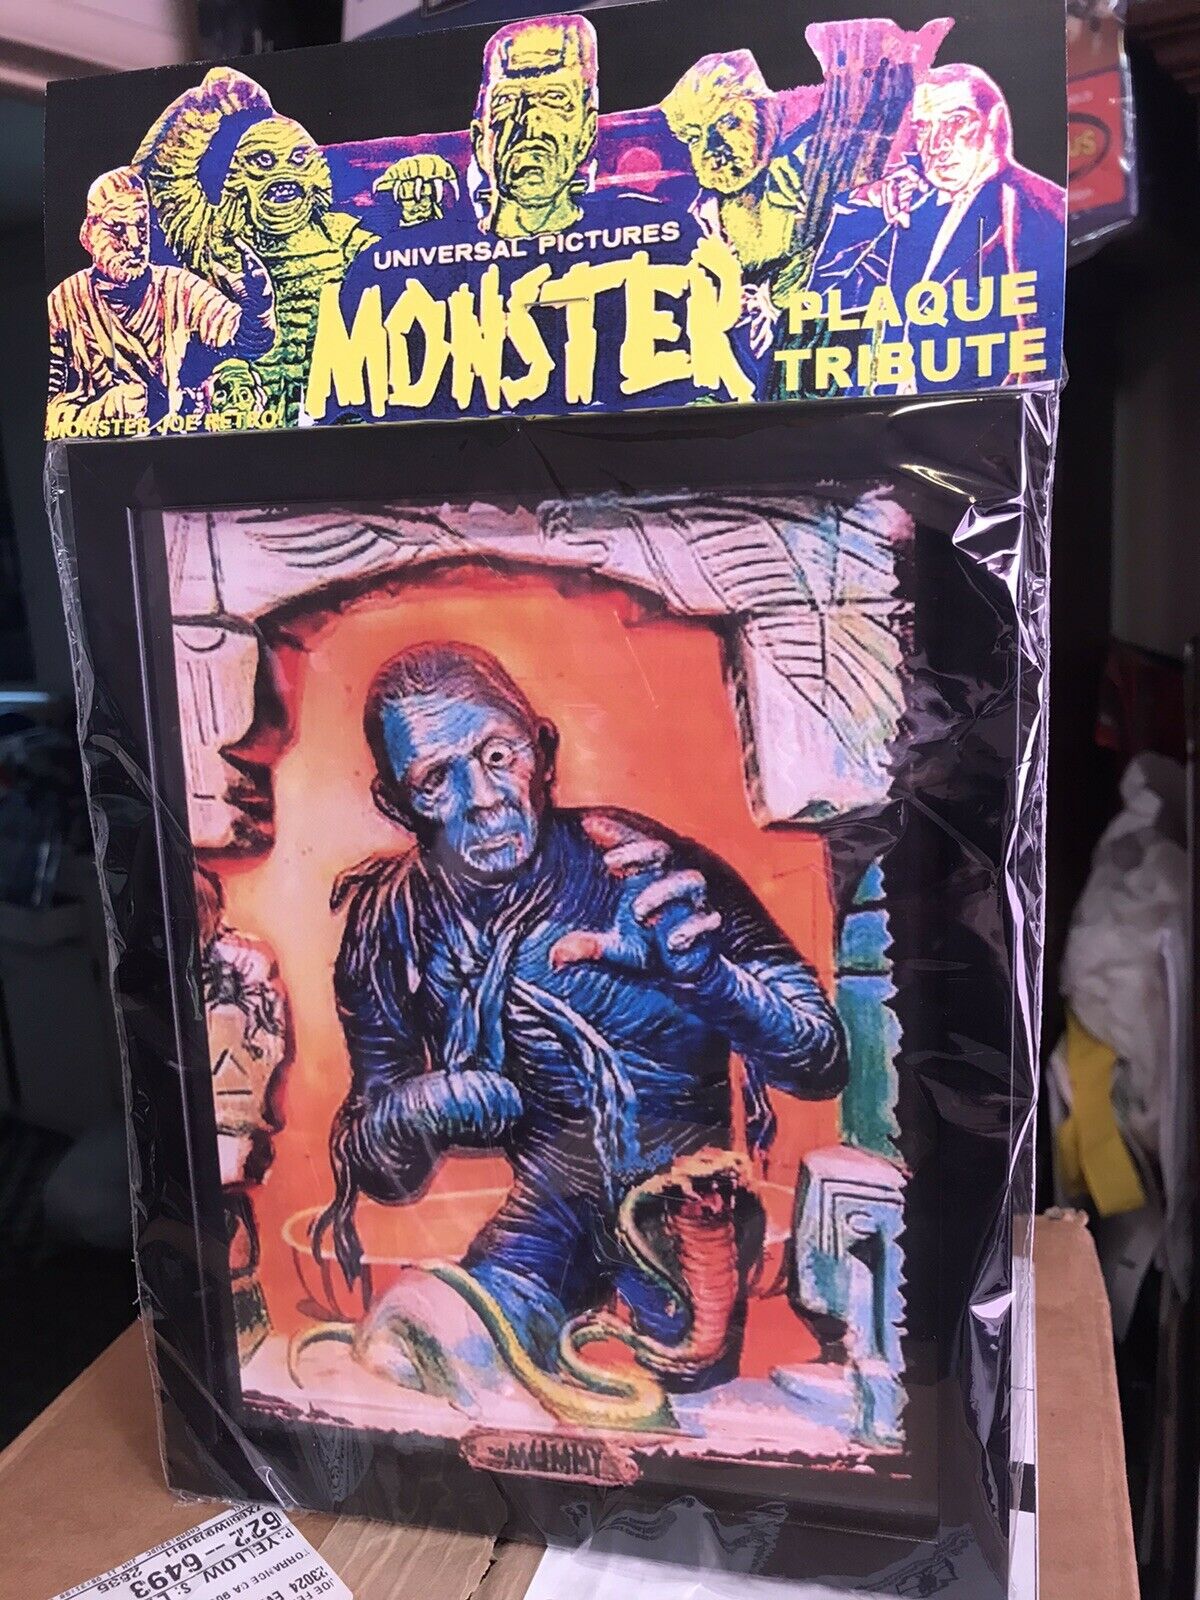 Universal Monsters Custom Made Collector Piece The Mummy Plaque Tribute Cool!